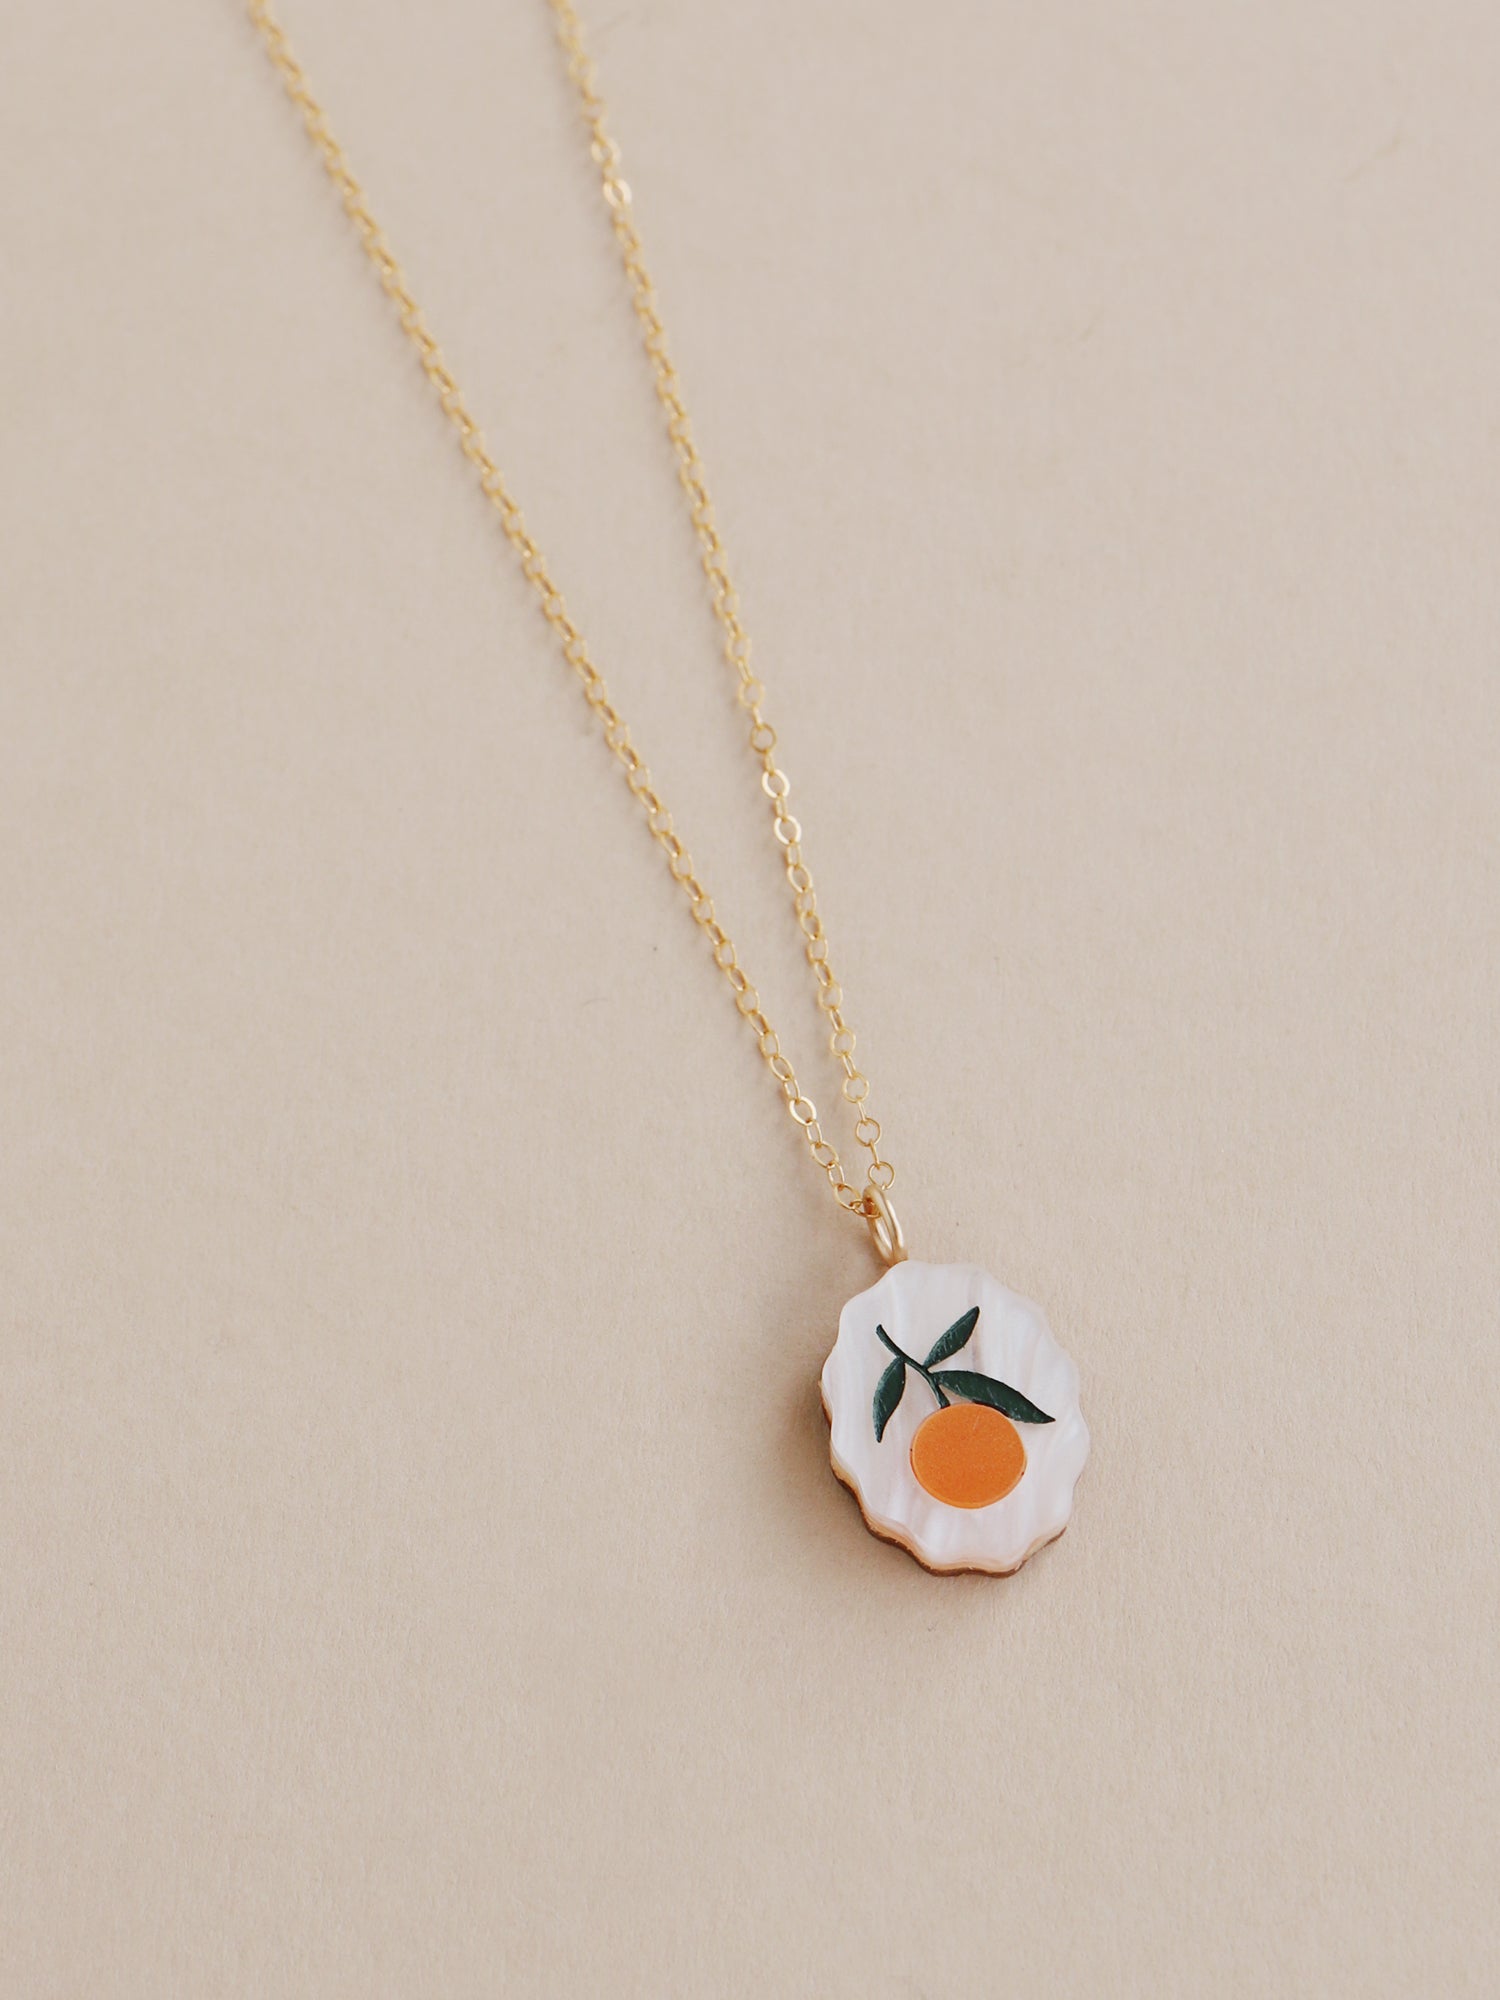 Orange charm necklace made from acrylic and a 14k gold-filled chain & findings. Handmade in the UK by Wolf & Moon